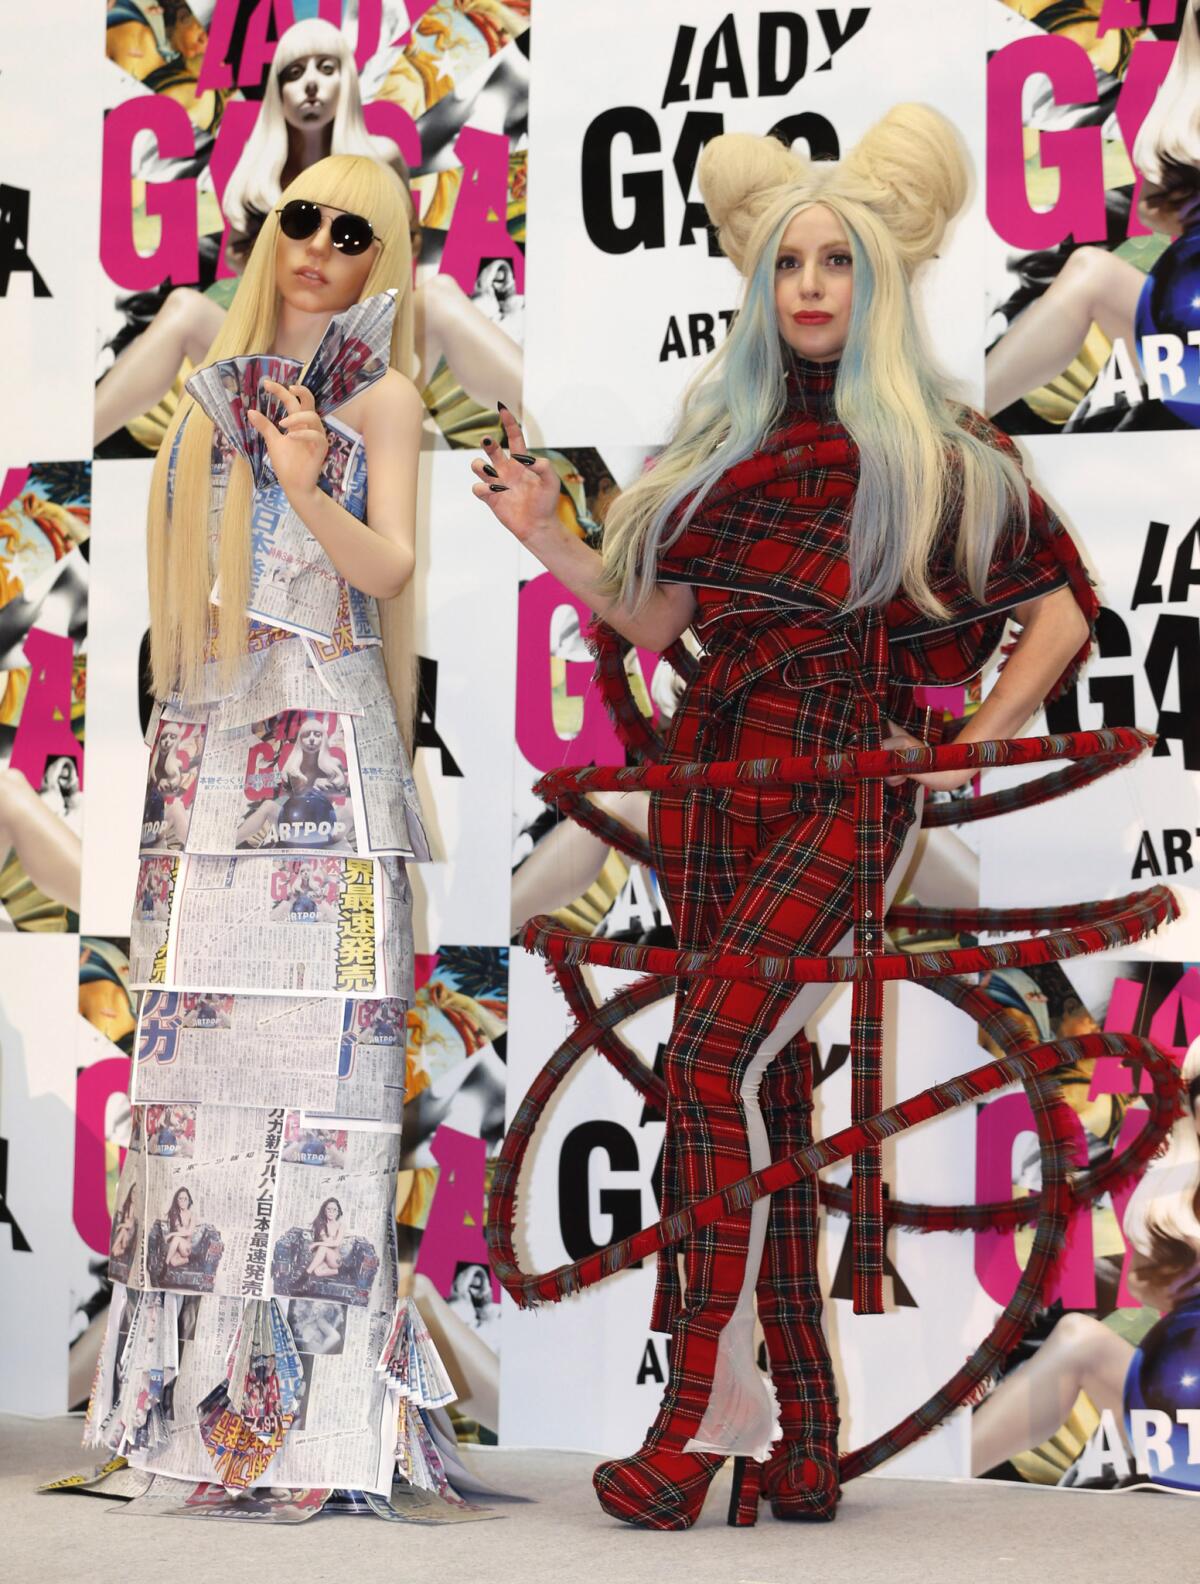 Lady Gaga, in plaid, poses with a life-sized Lady Gaga doll at a news conference in Tokyo to promote her album "ArtPop."